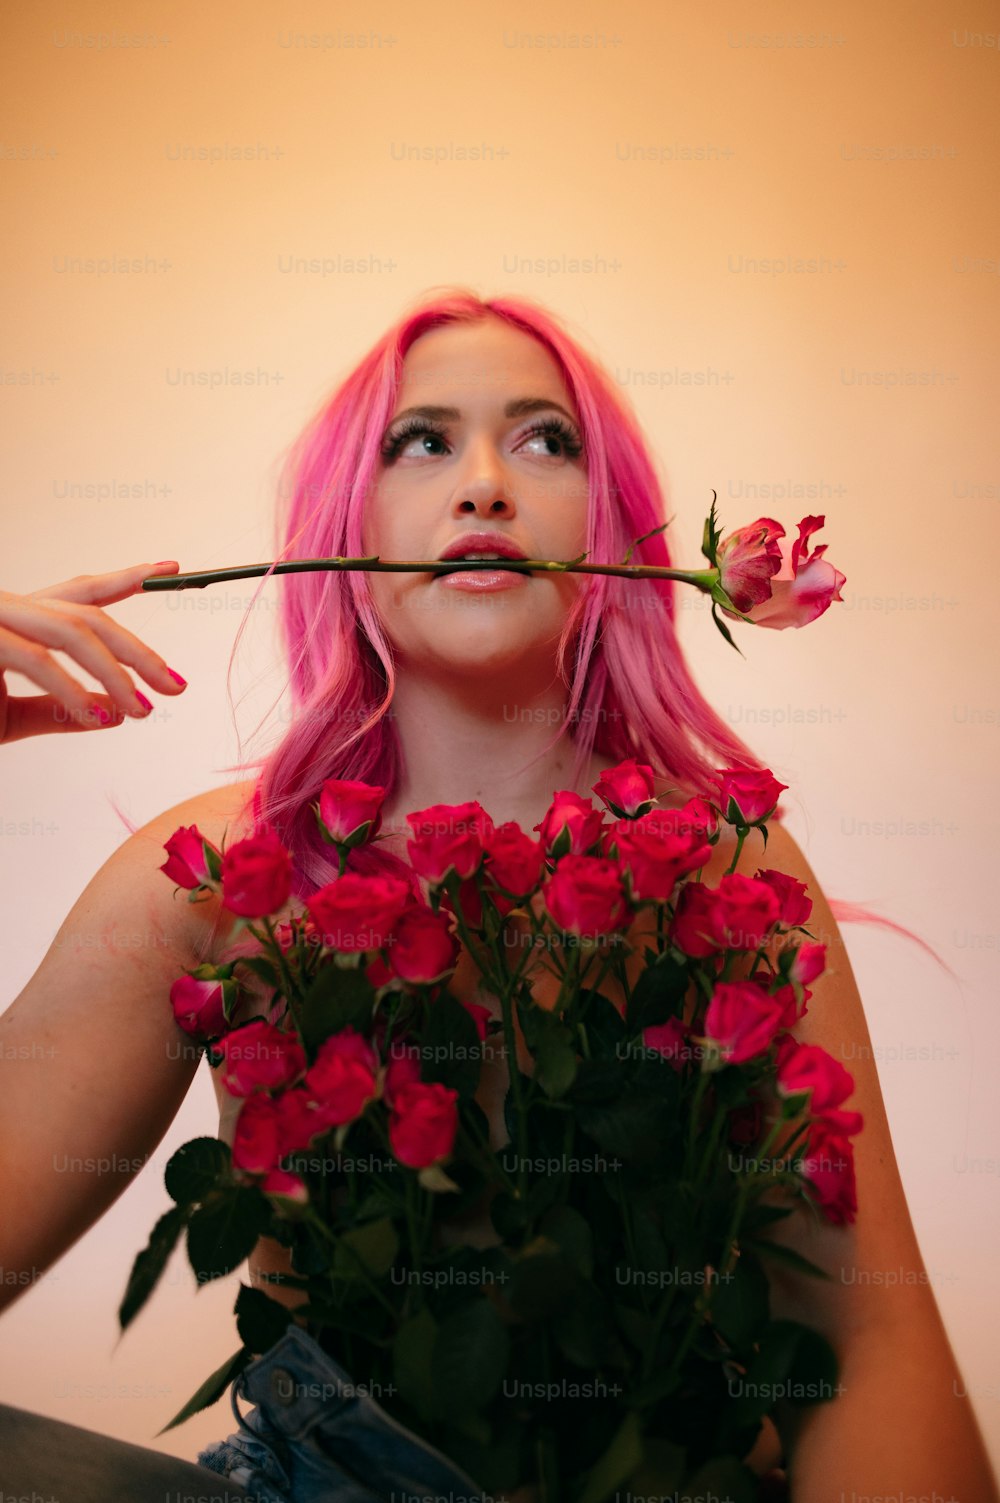 a woman with pink hair holding a bouquet of flowers